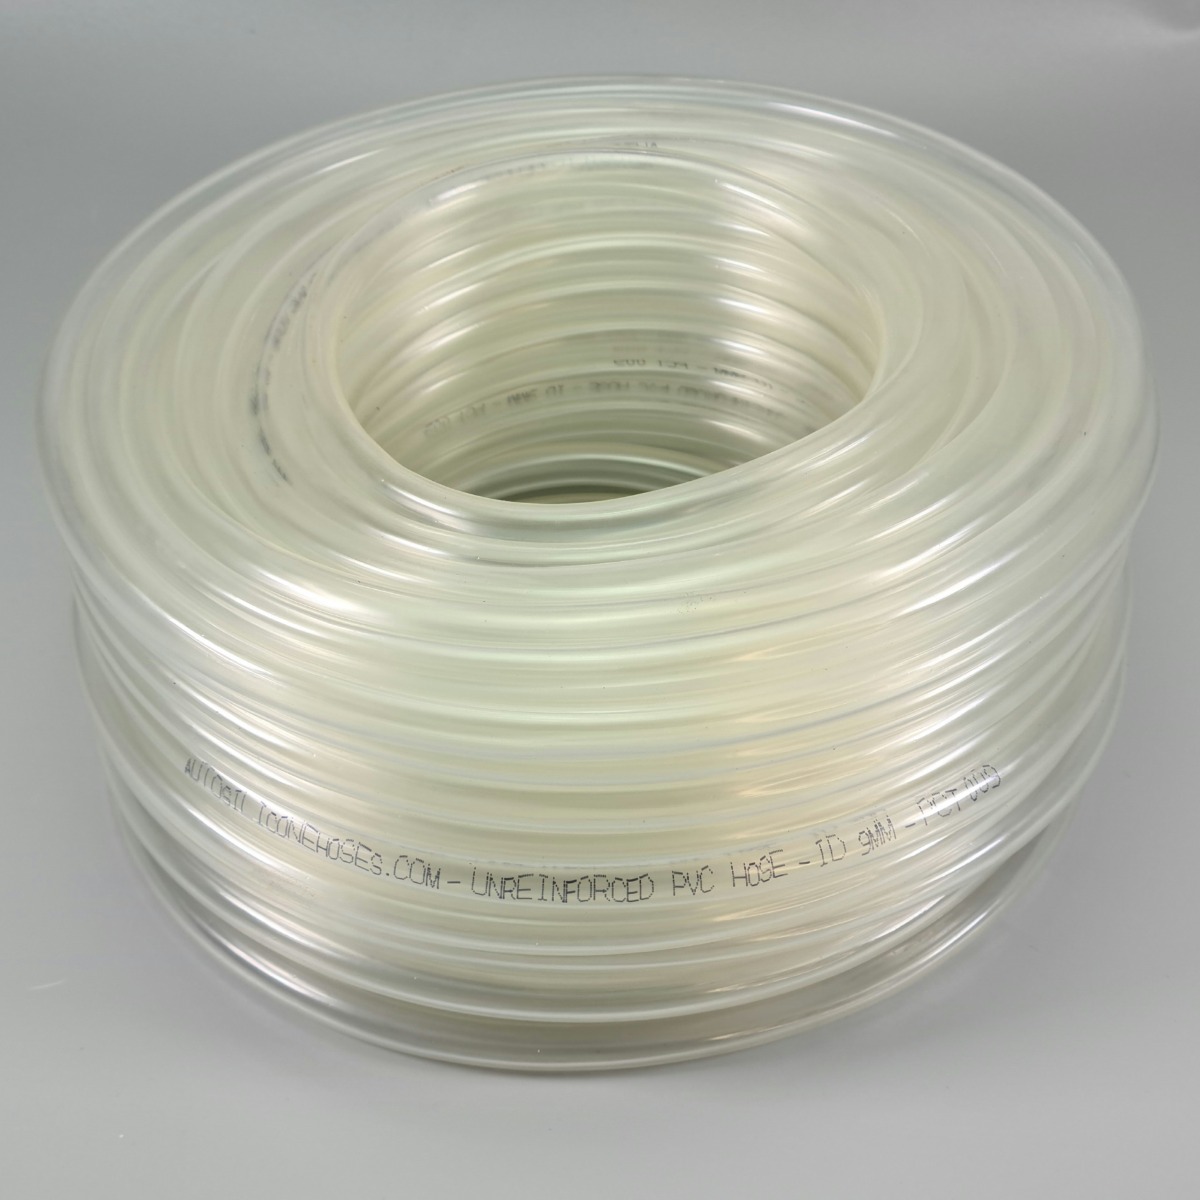 25mm or 1" Clear Flexible PVC Tube Reinforced Pipe Water Pond Braided Air Hose 